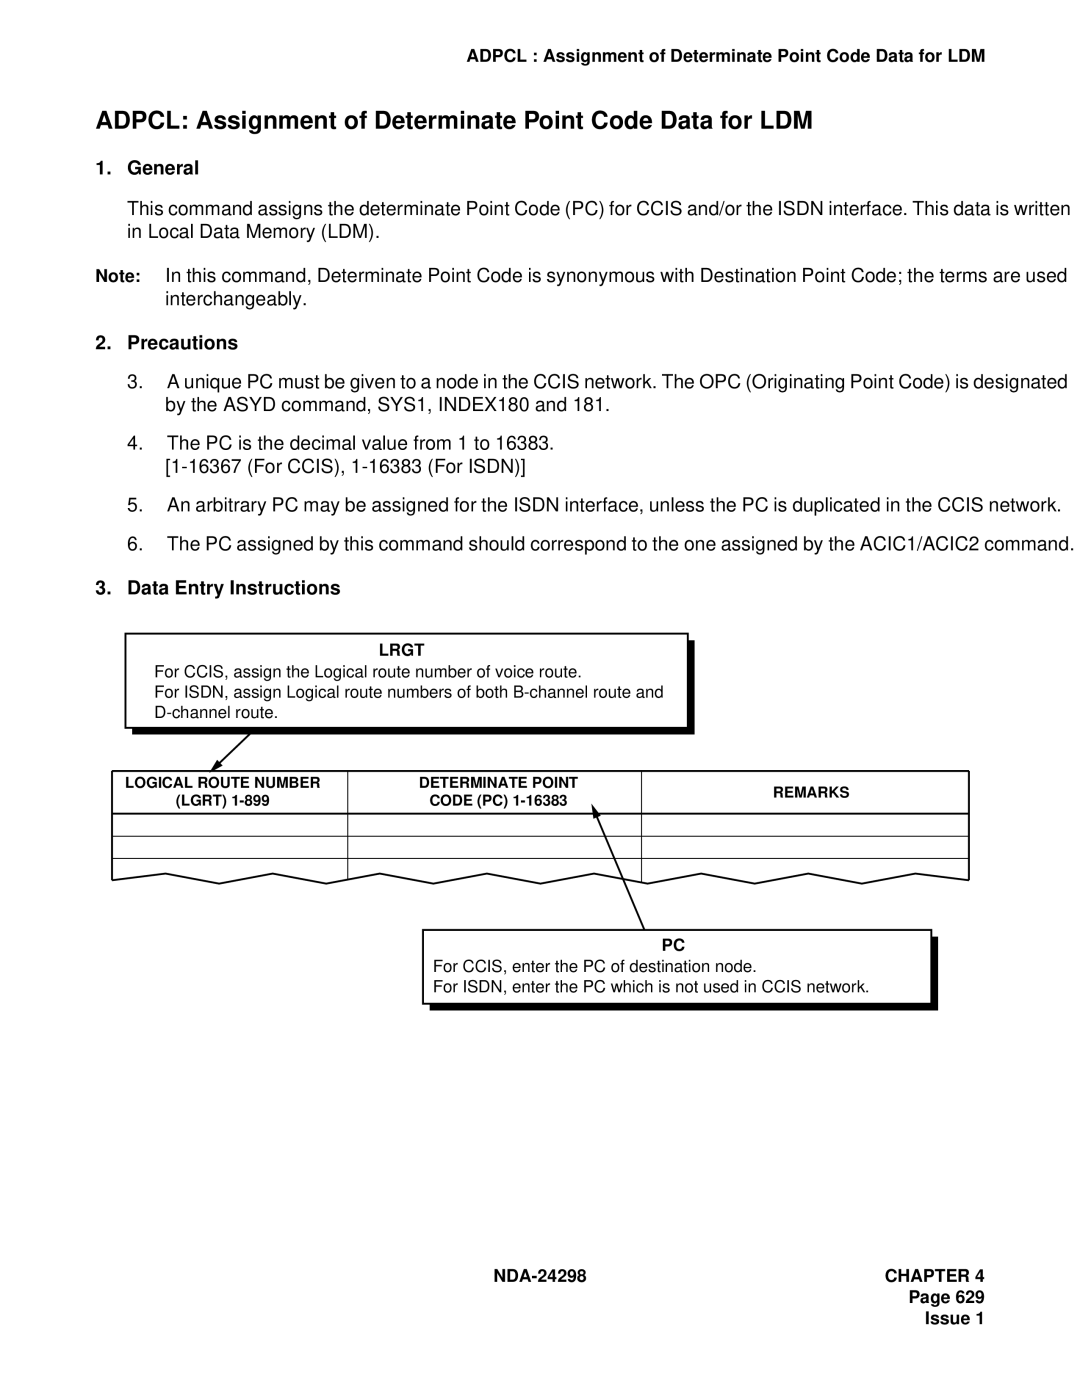 NEC NDA-24298 manual Adpcl Assignment of Determinate Point Code Data for LDM, Lrgt 